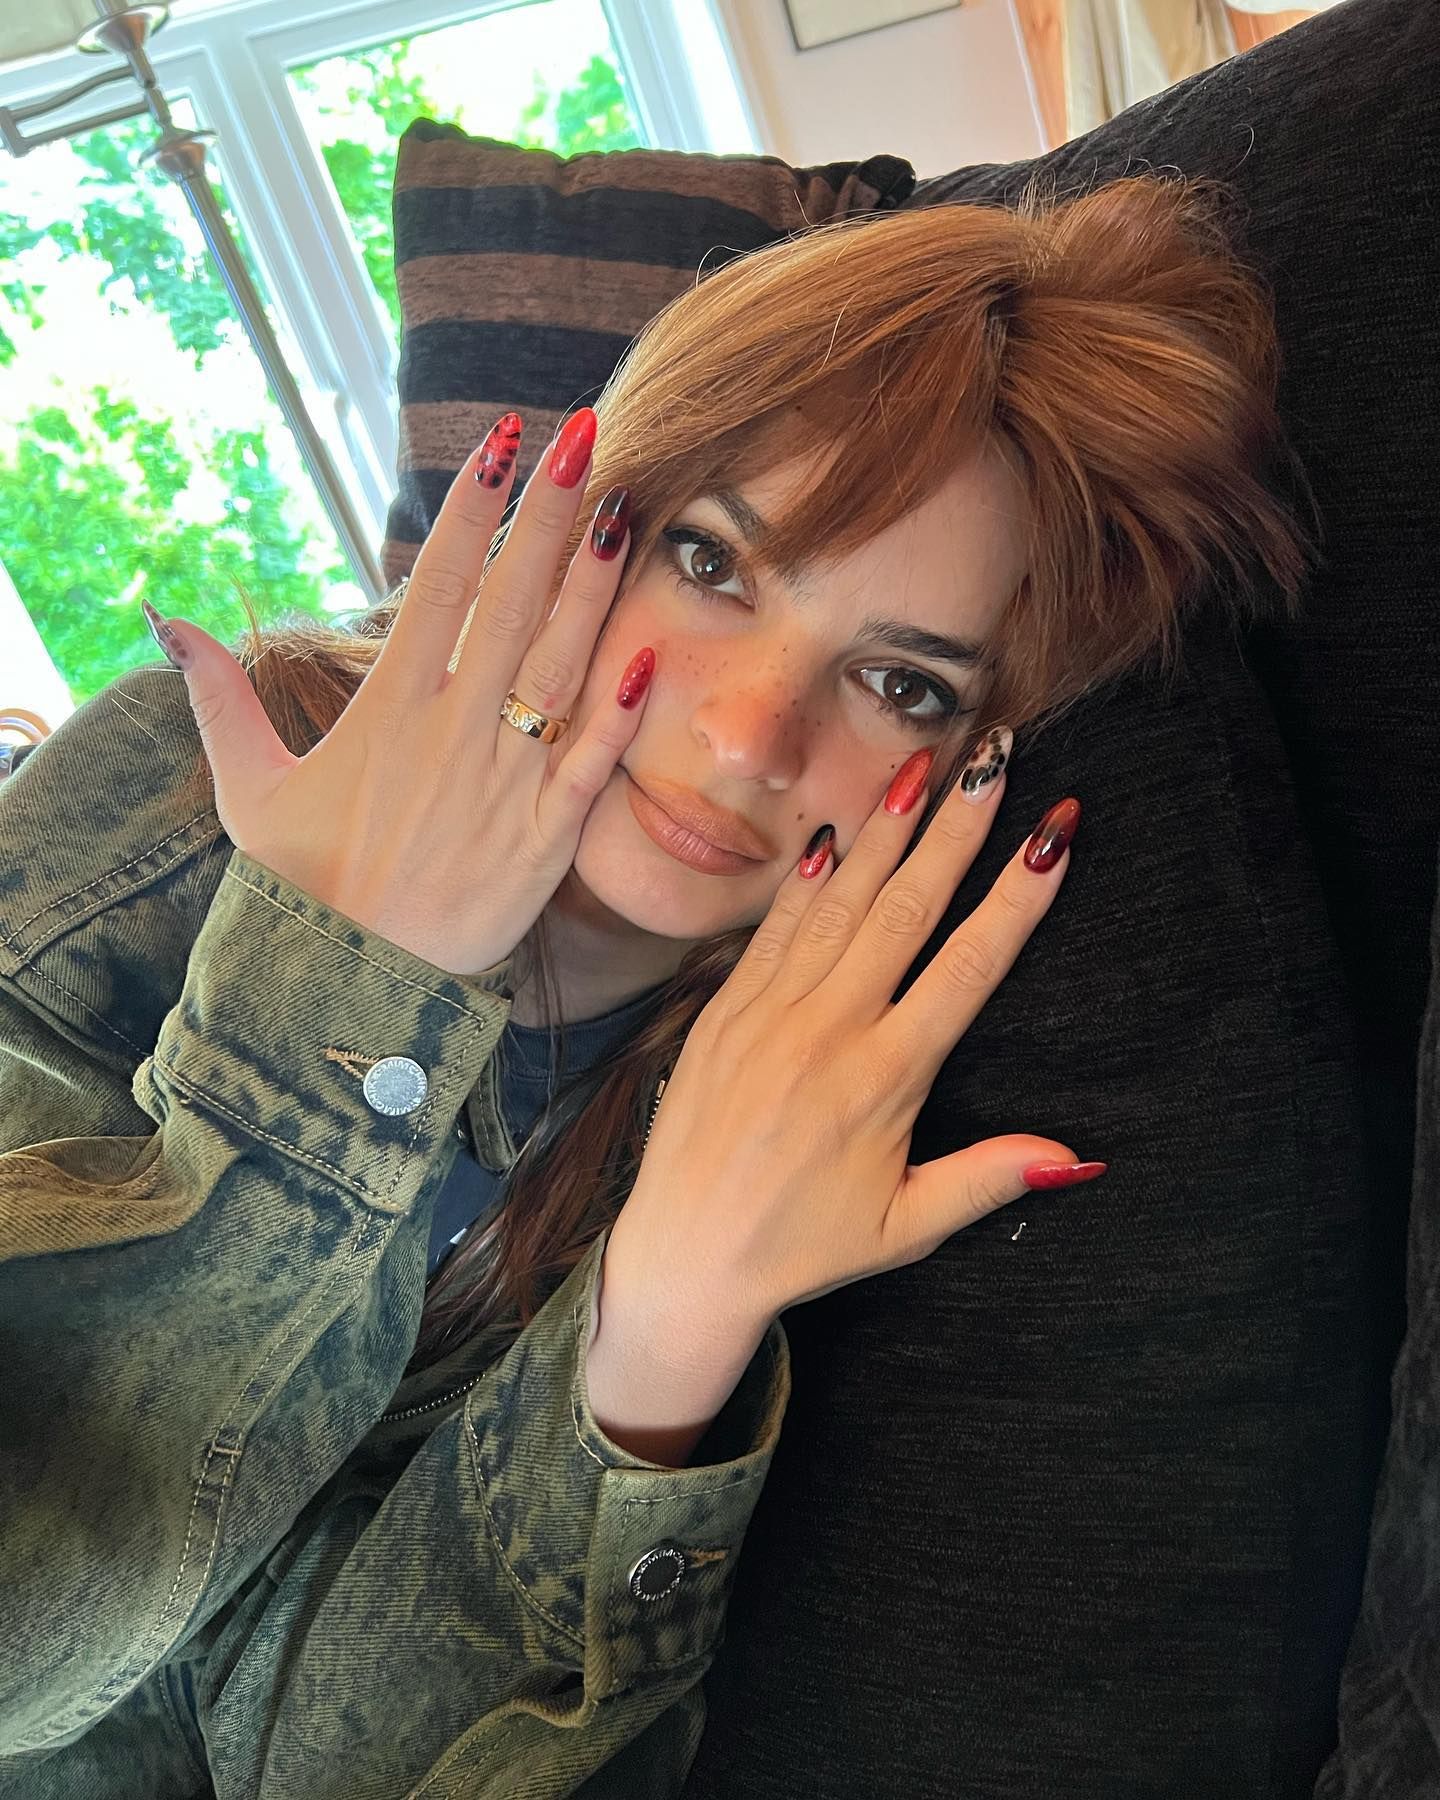 All The Best New Manicure Inspo Courtesy Of Your Favourite Celebs |  BEAUTY/crew